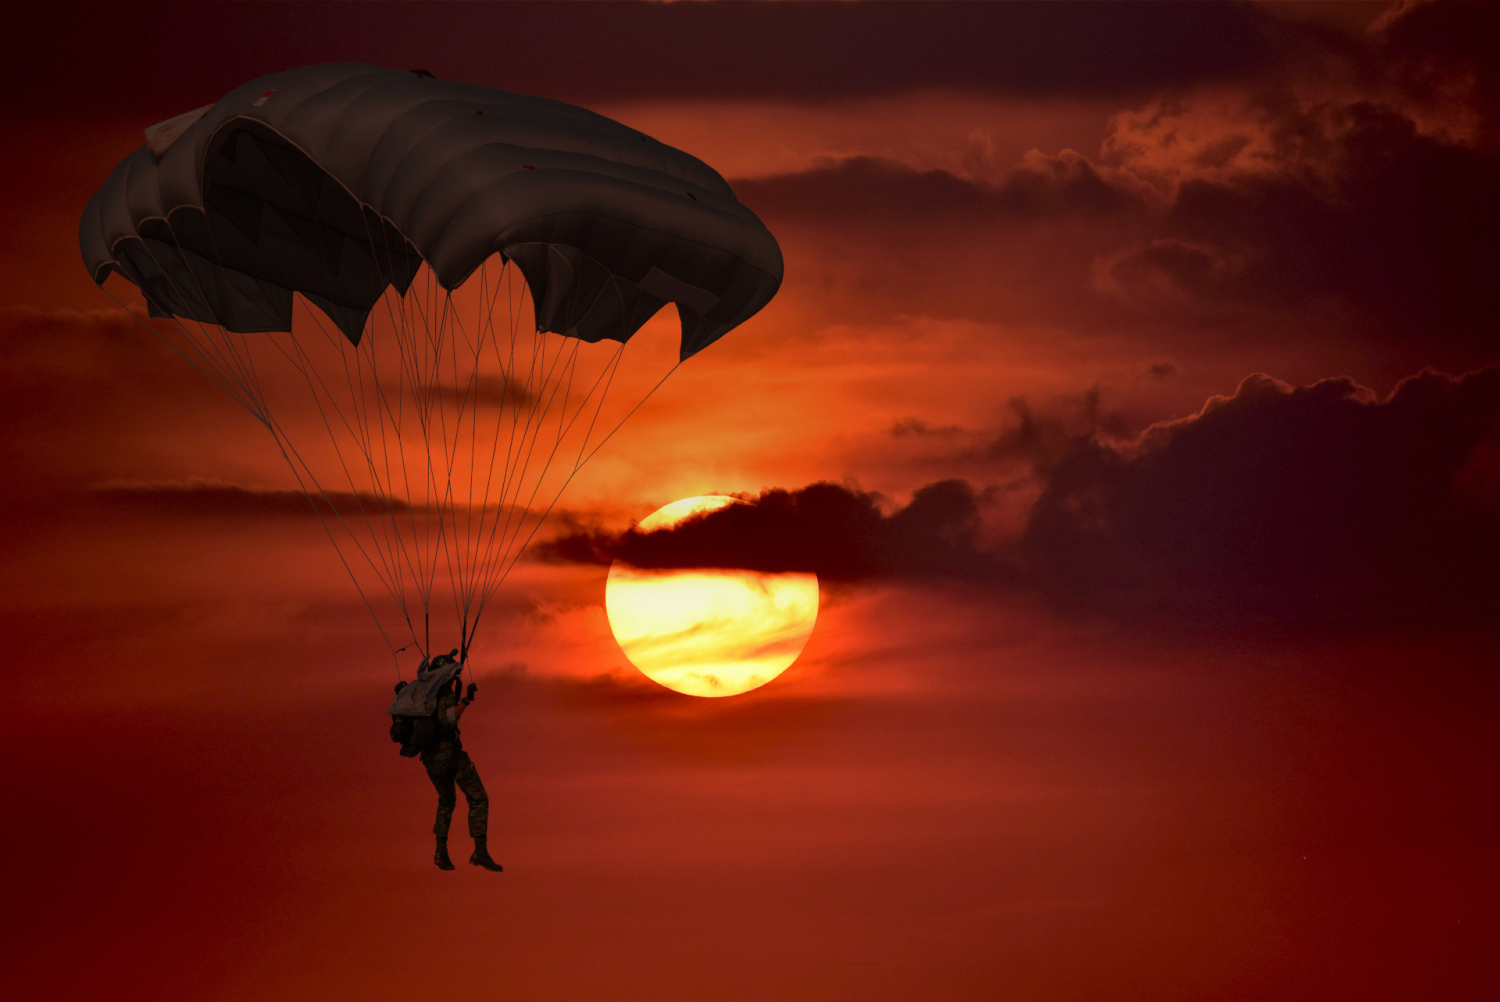 Paratrooper in front of a Sunset